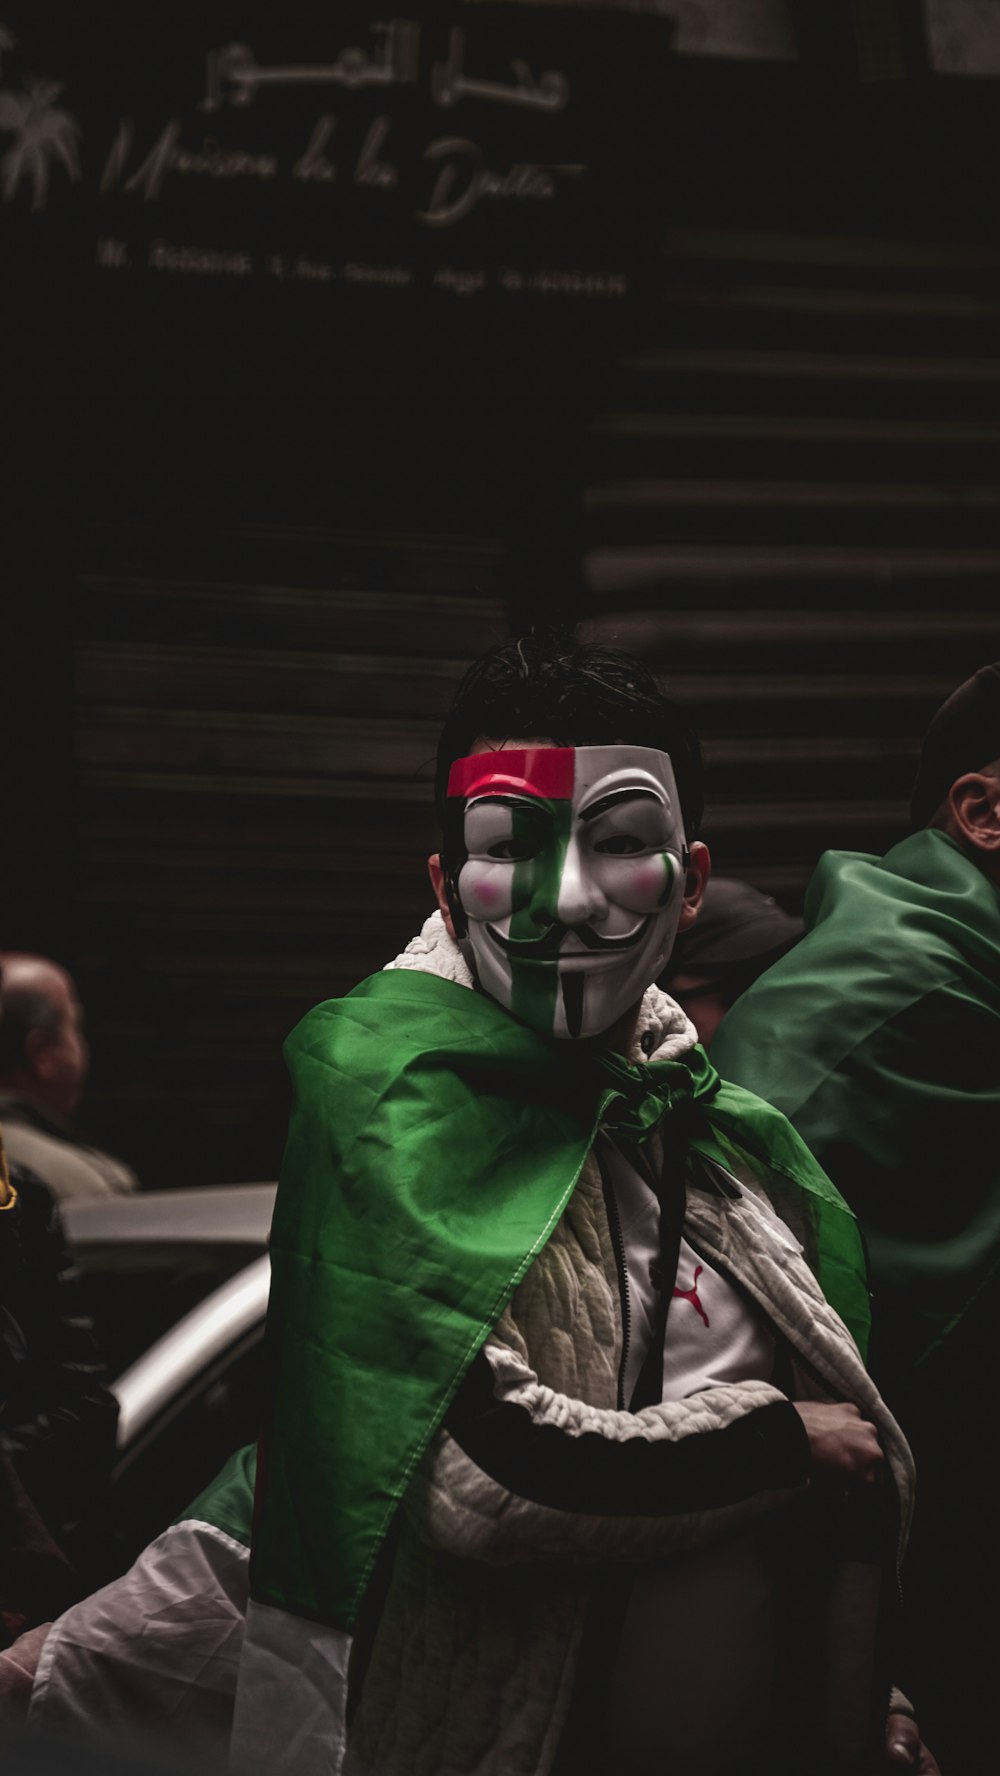 man with Guy Fawkes mask and green cape